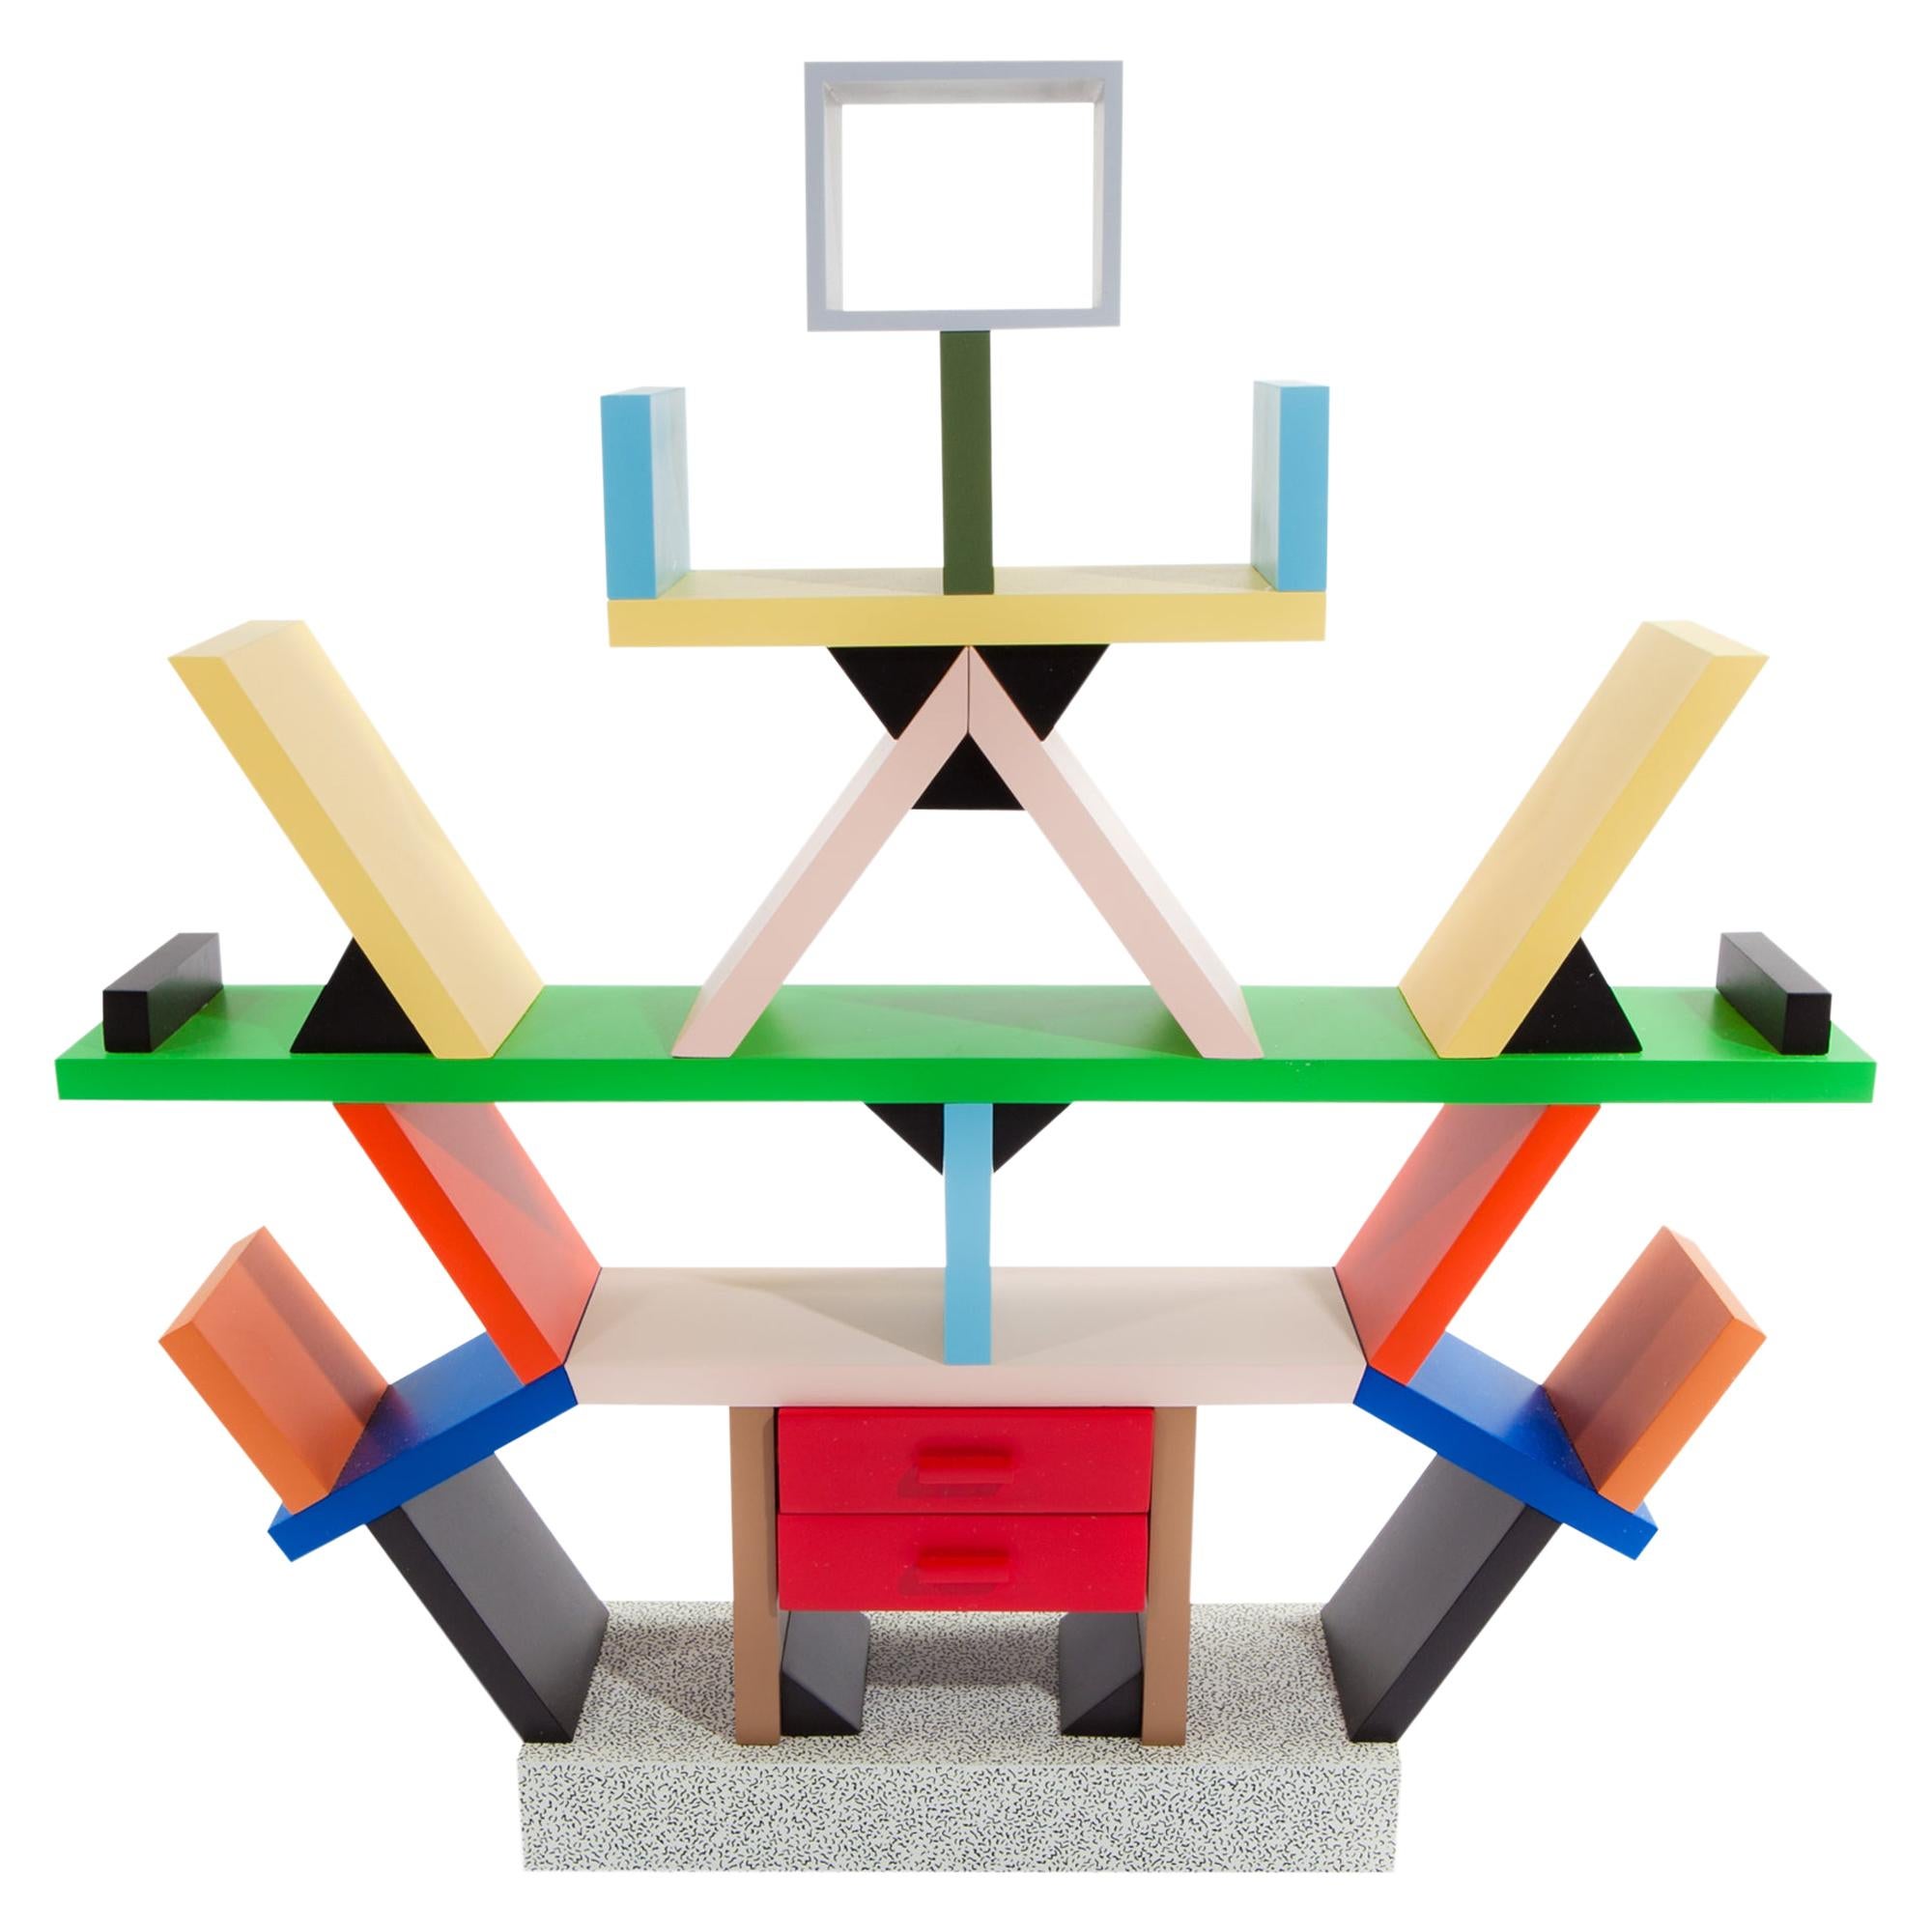 Carlton Wood Room Divider, by Ettore Sottsass for Memphis Milano Collection